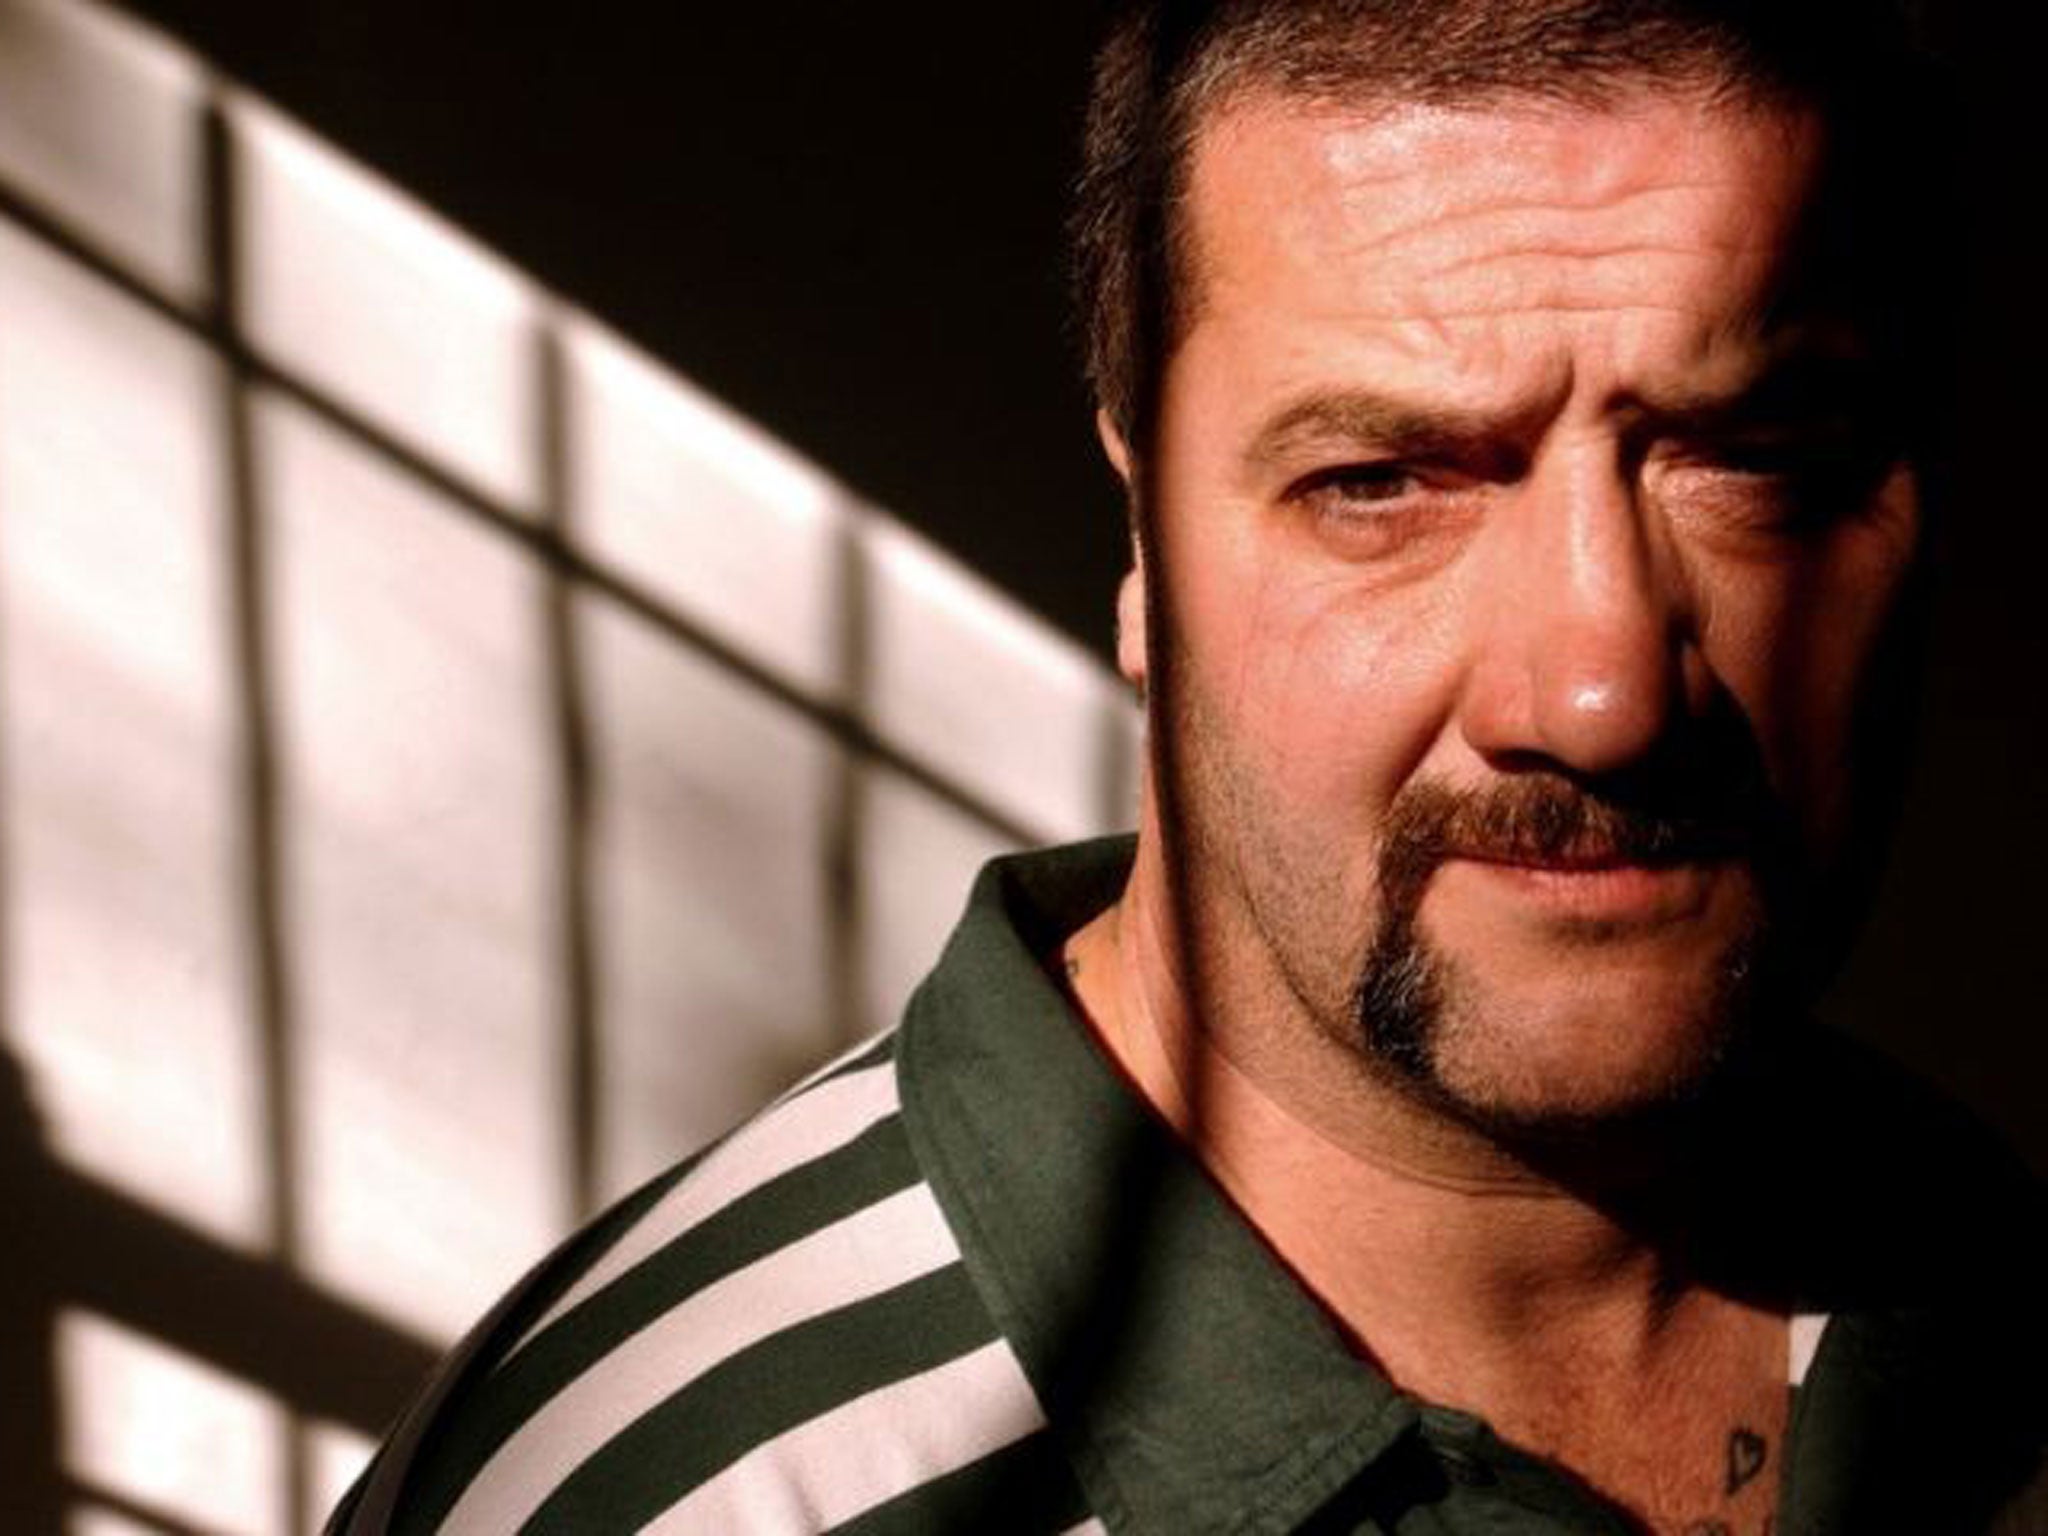 Mark "Chopper" Read (pictured here on launch of one of his books in 2002) has died after a long battle with liver cancer, his manager said. He was 58